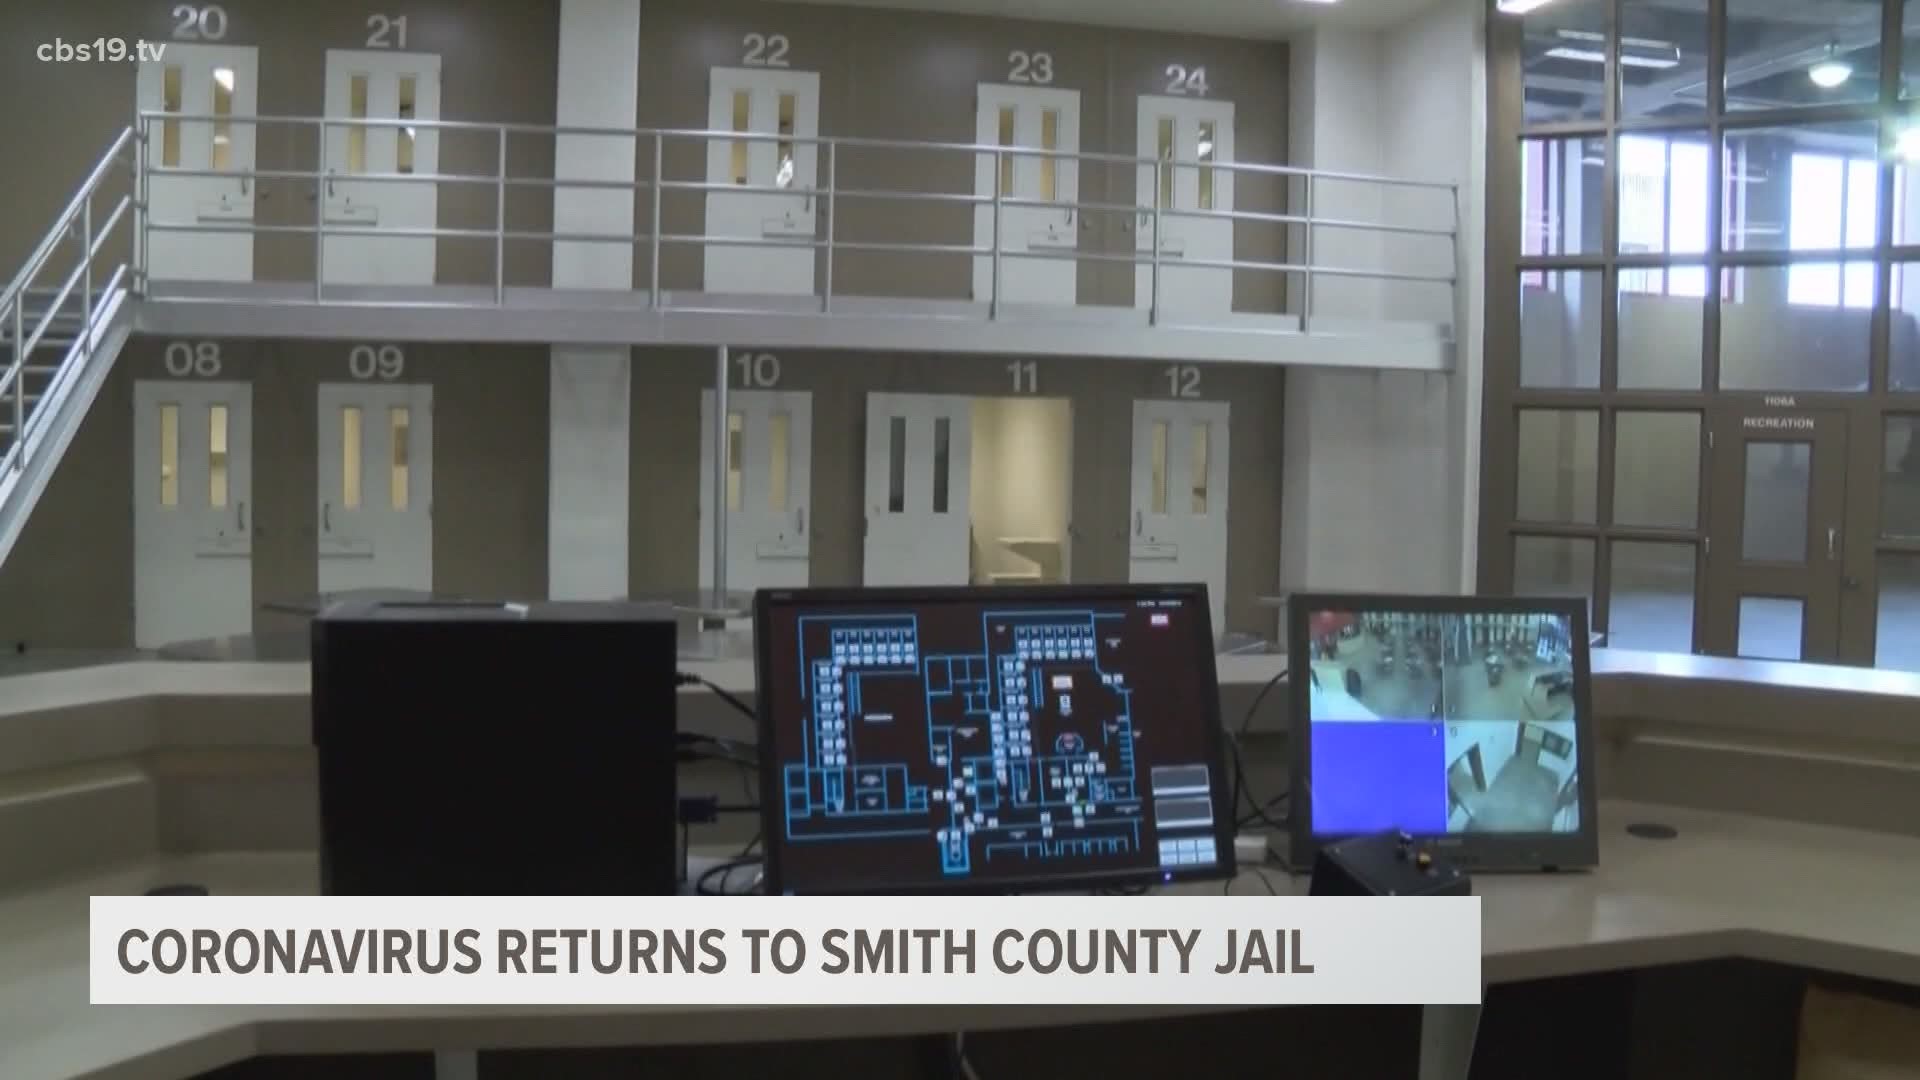 The jail said it is working with NET Health officials to limit the spread of the virus.